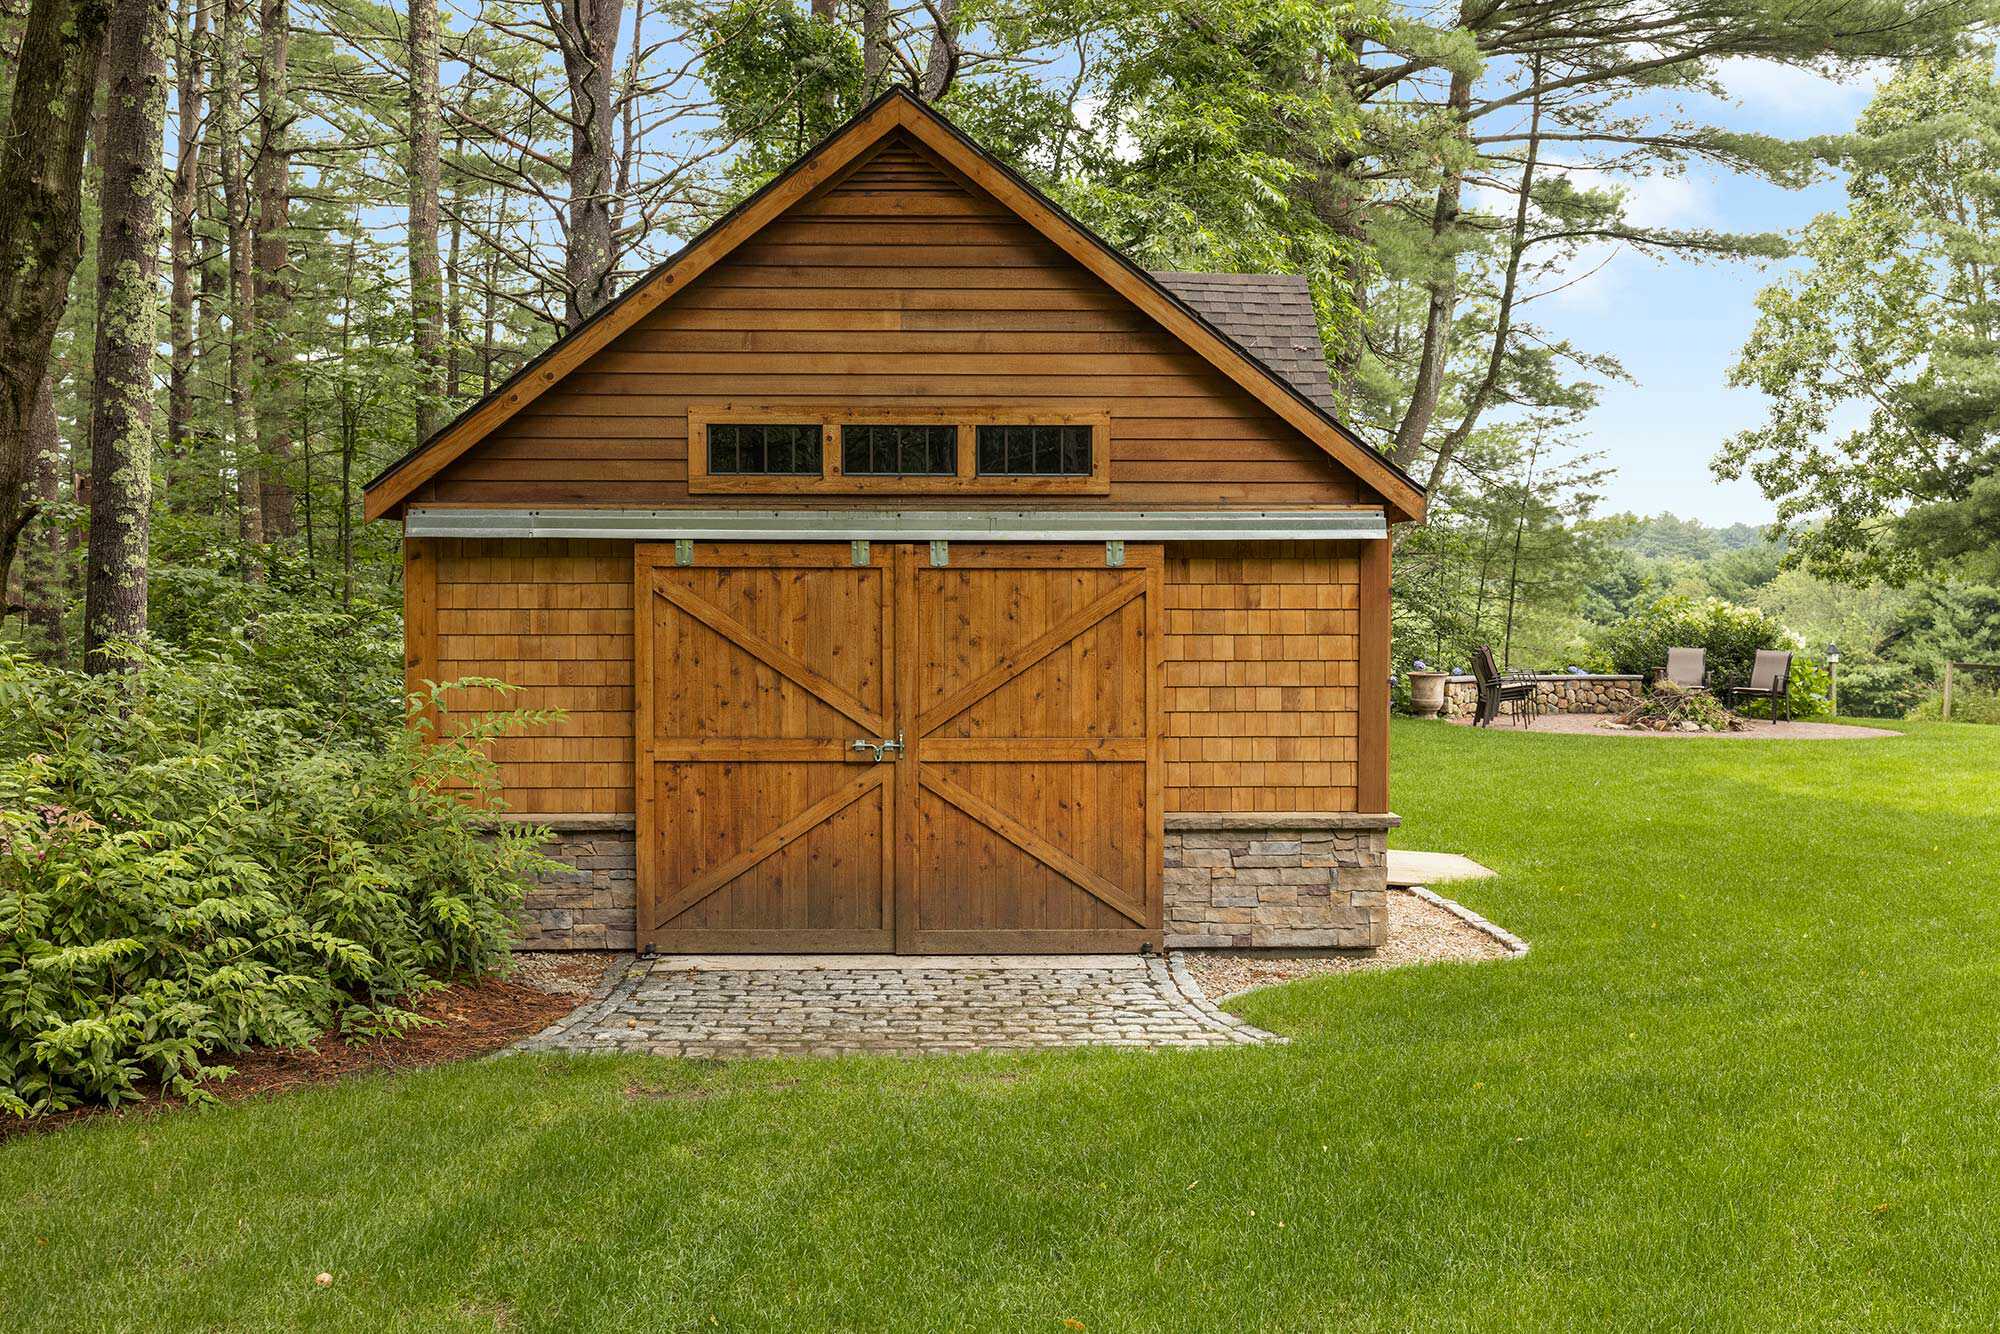 6 Ideas for a Beautiful Barn Shed